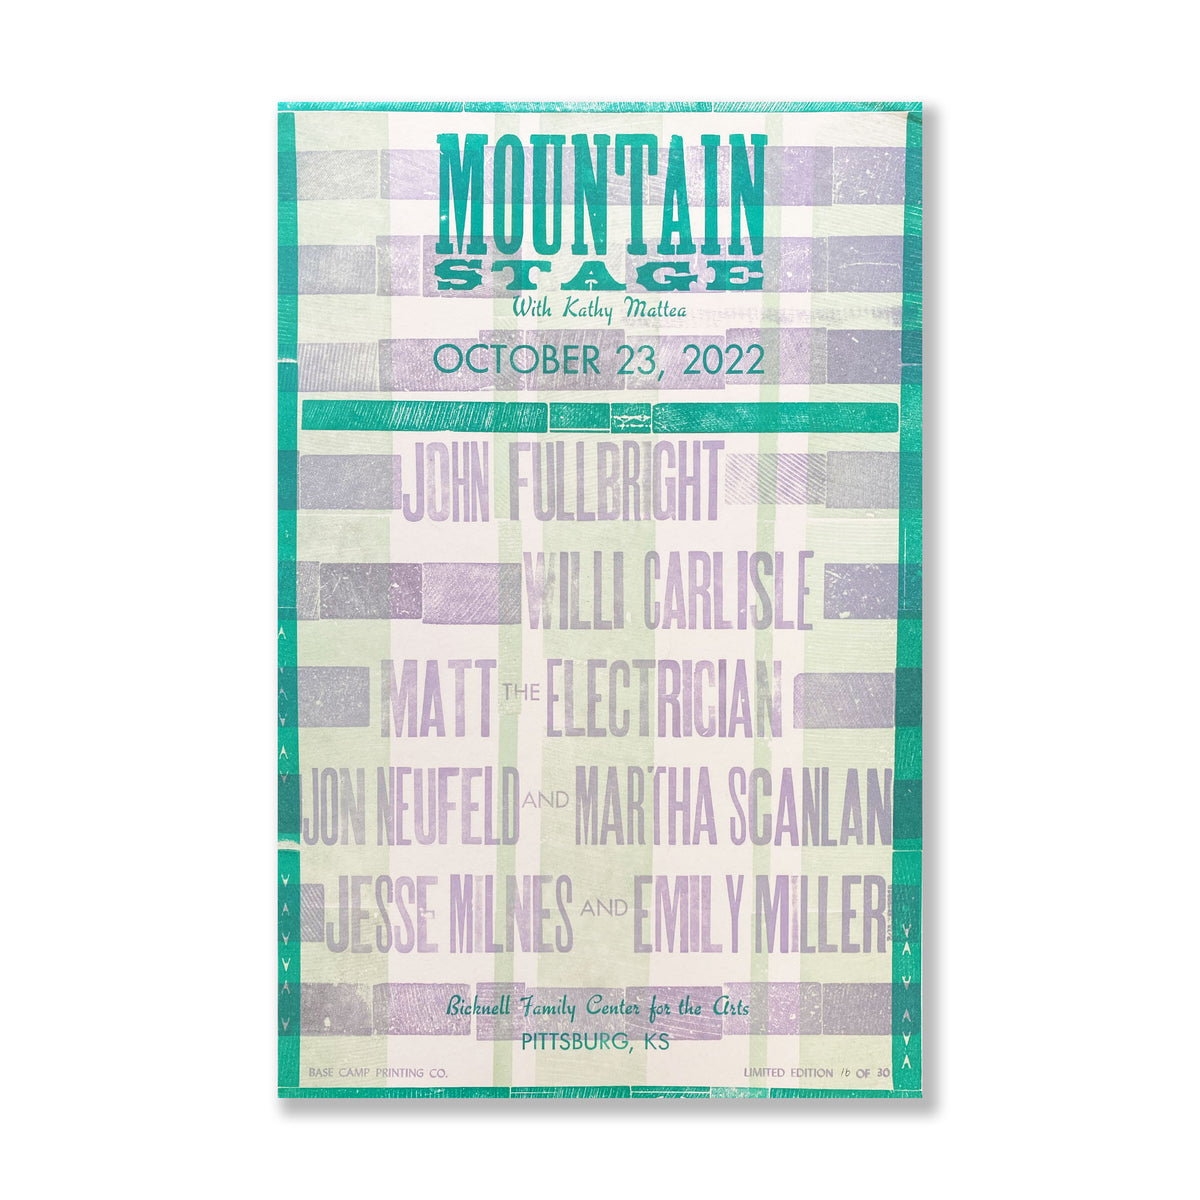 October 23, 2022 Mountain Stage Poster